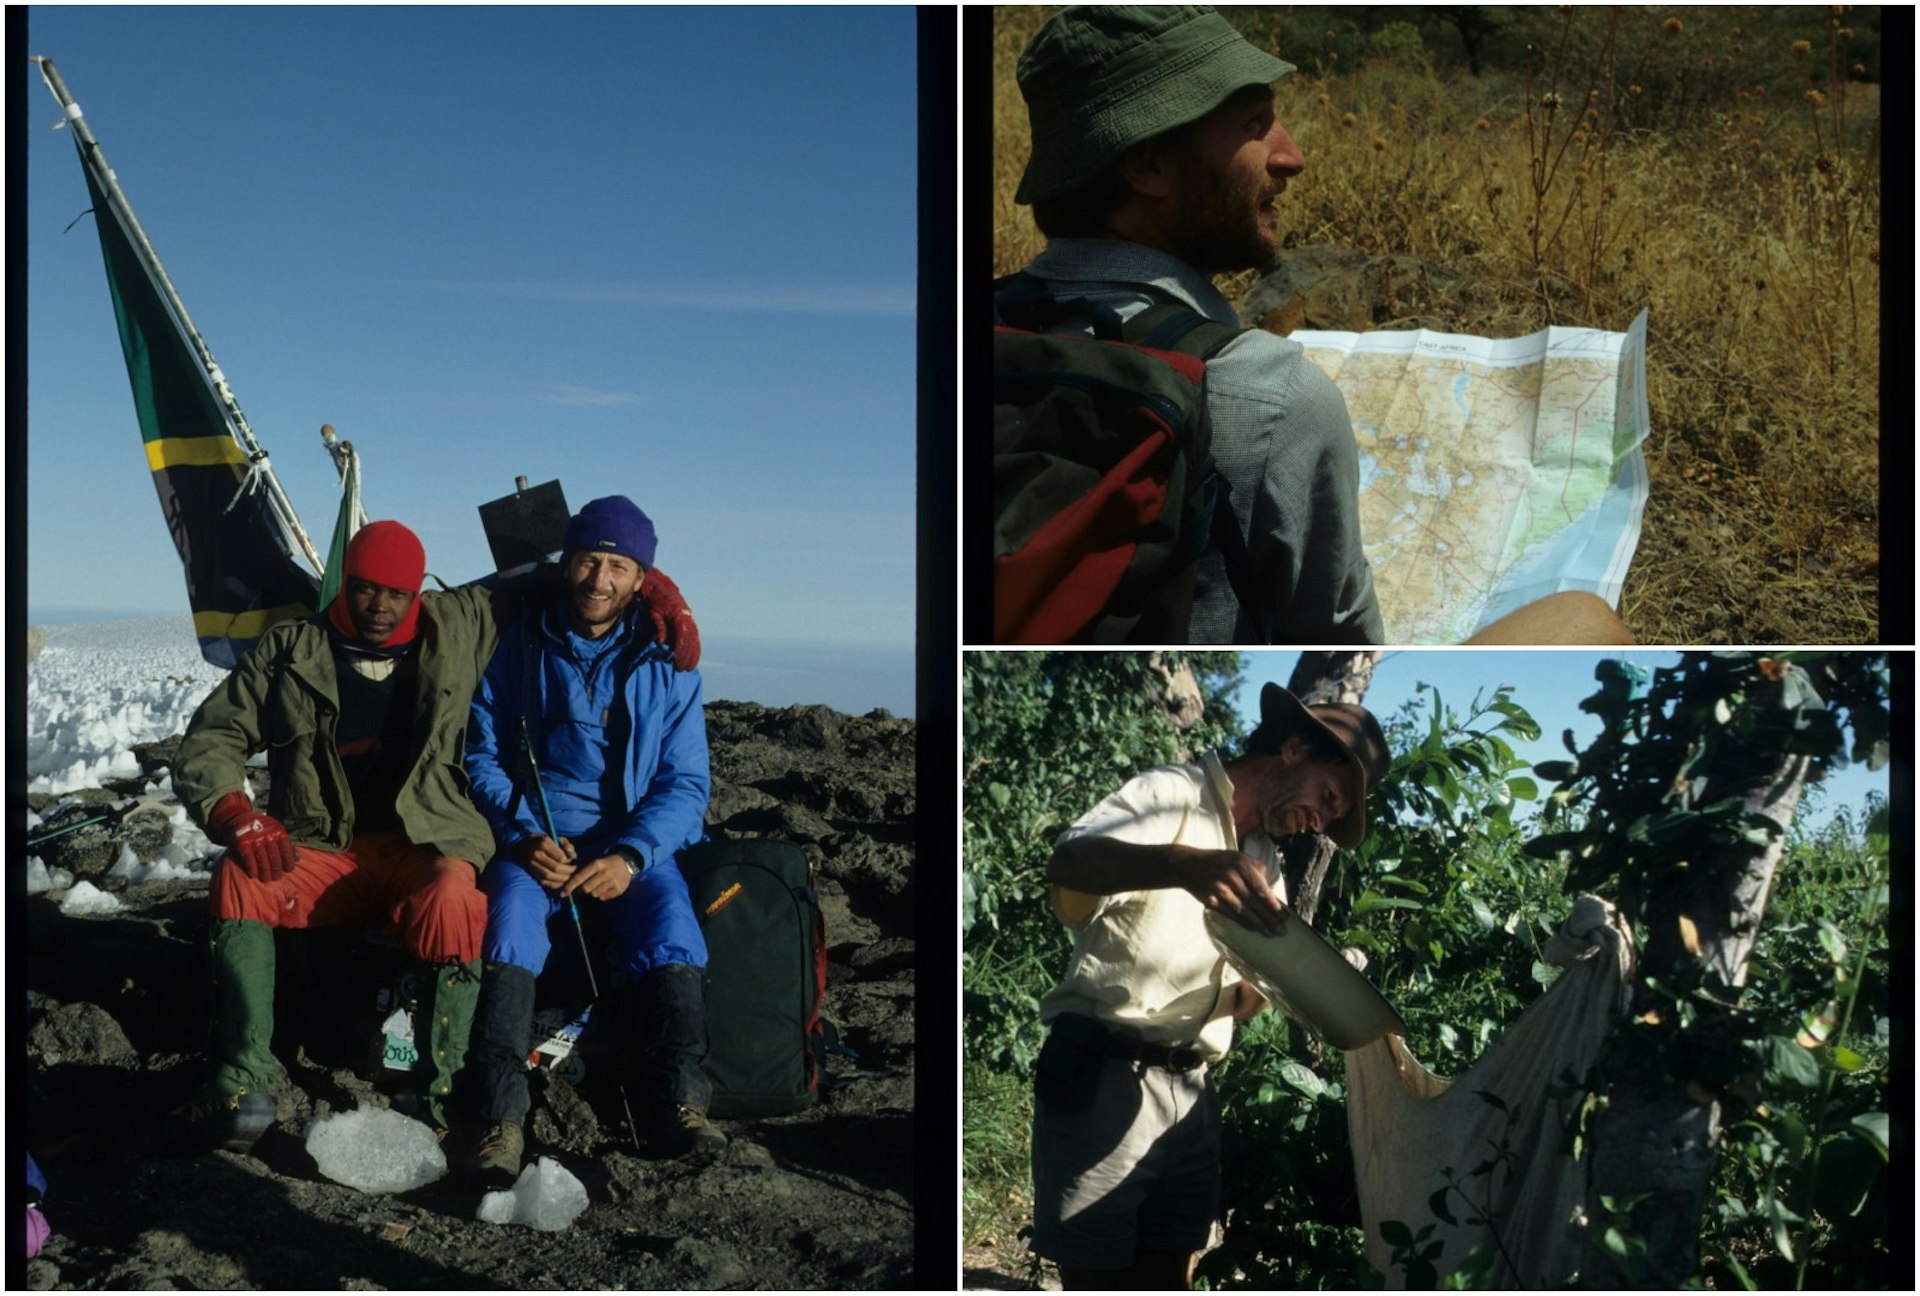 (Clockwise from left) 1993 David Else & local guide Matthew on summit of Kilimanjaro; 1993 David Else exploring the Rift Valley between Kenya and Tanzania in 1993; building a makeshift fridge in the bush in Botswana in 1996